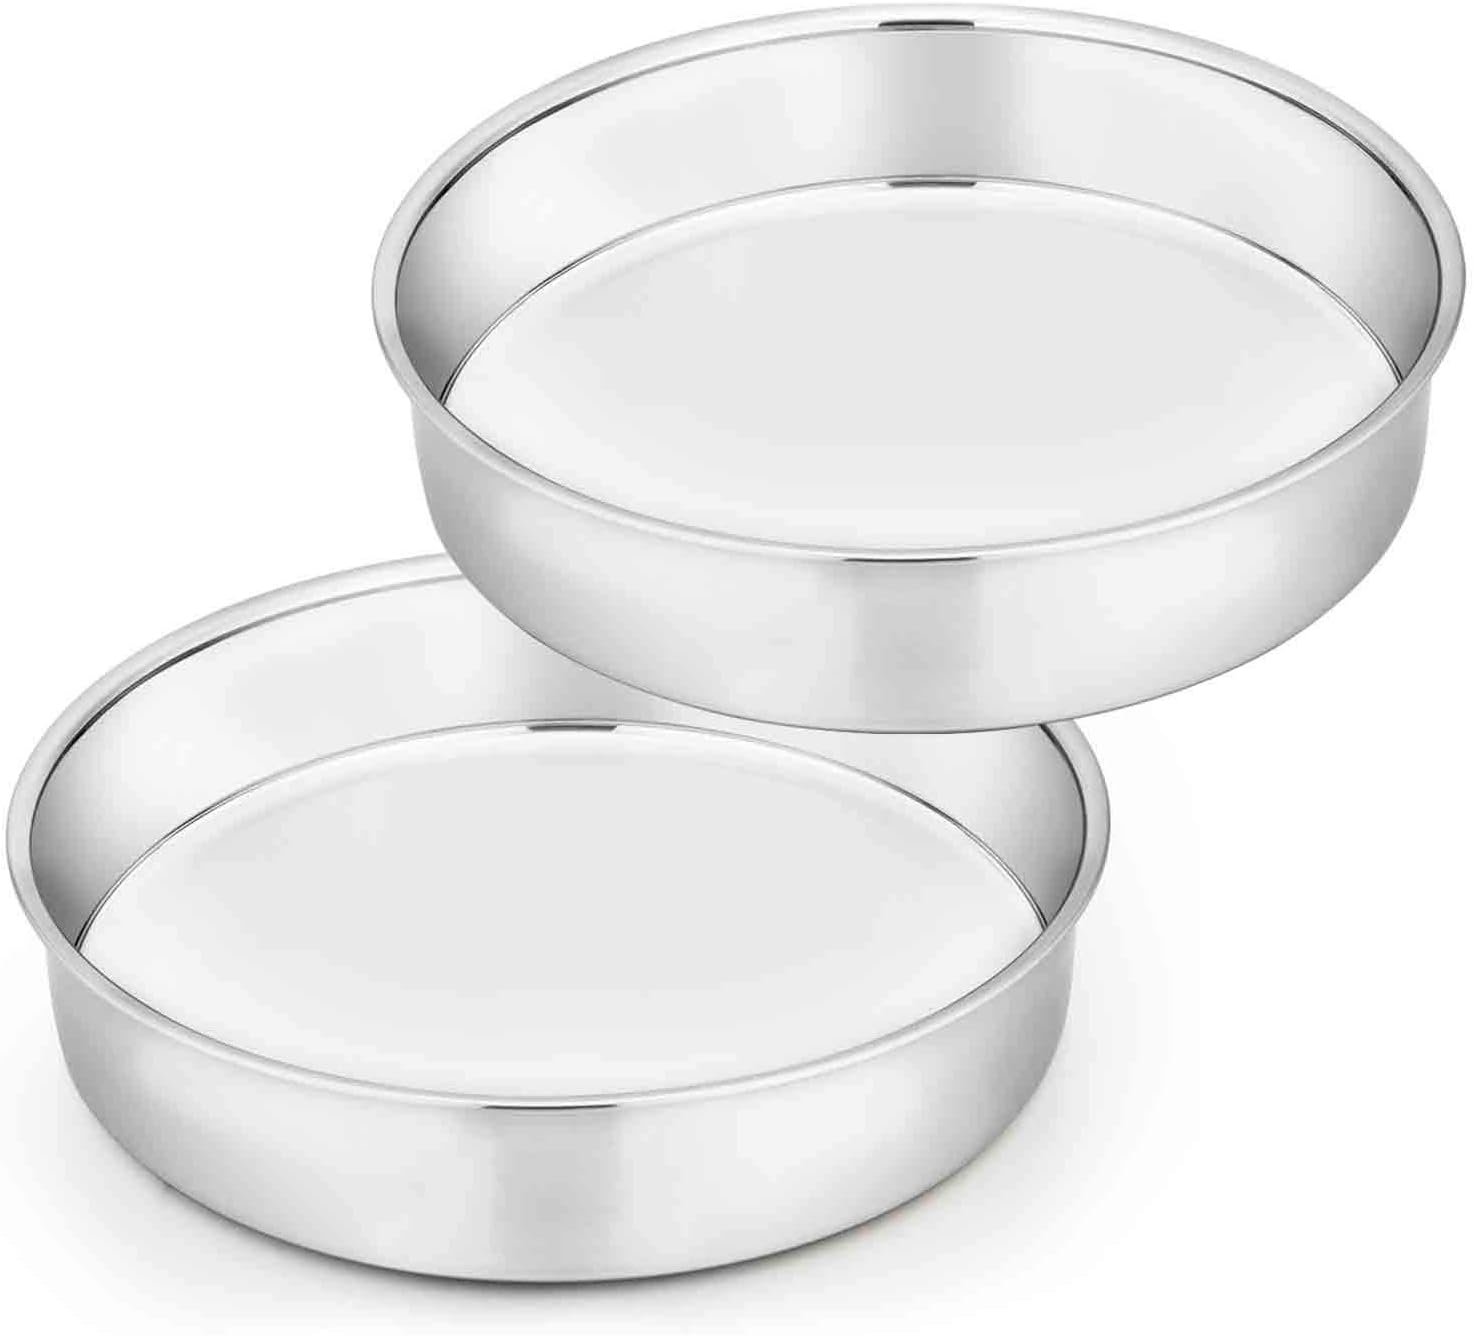 The 8 Best Cake Pans of 2023